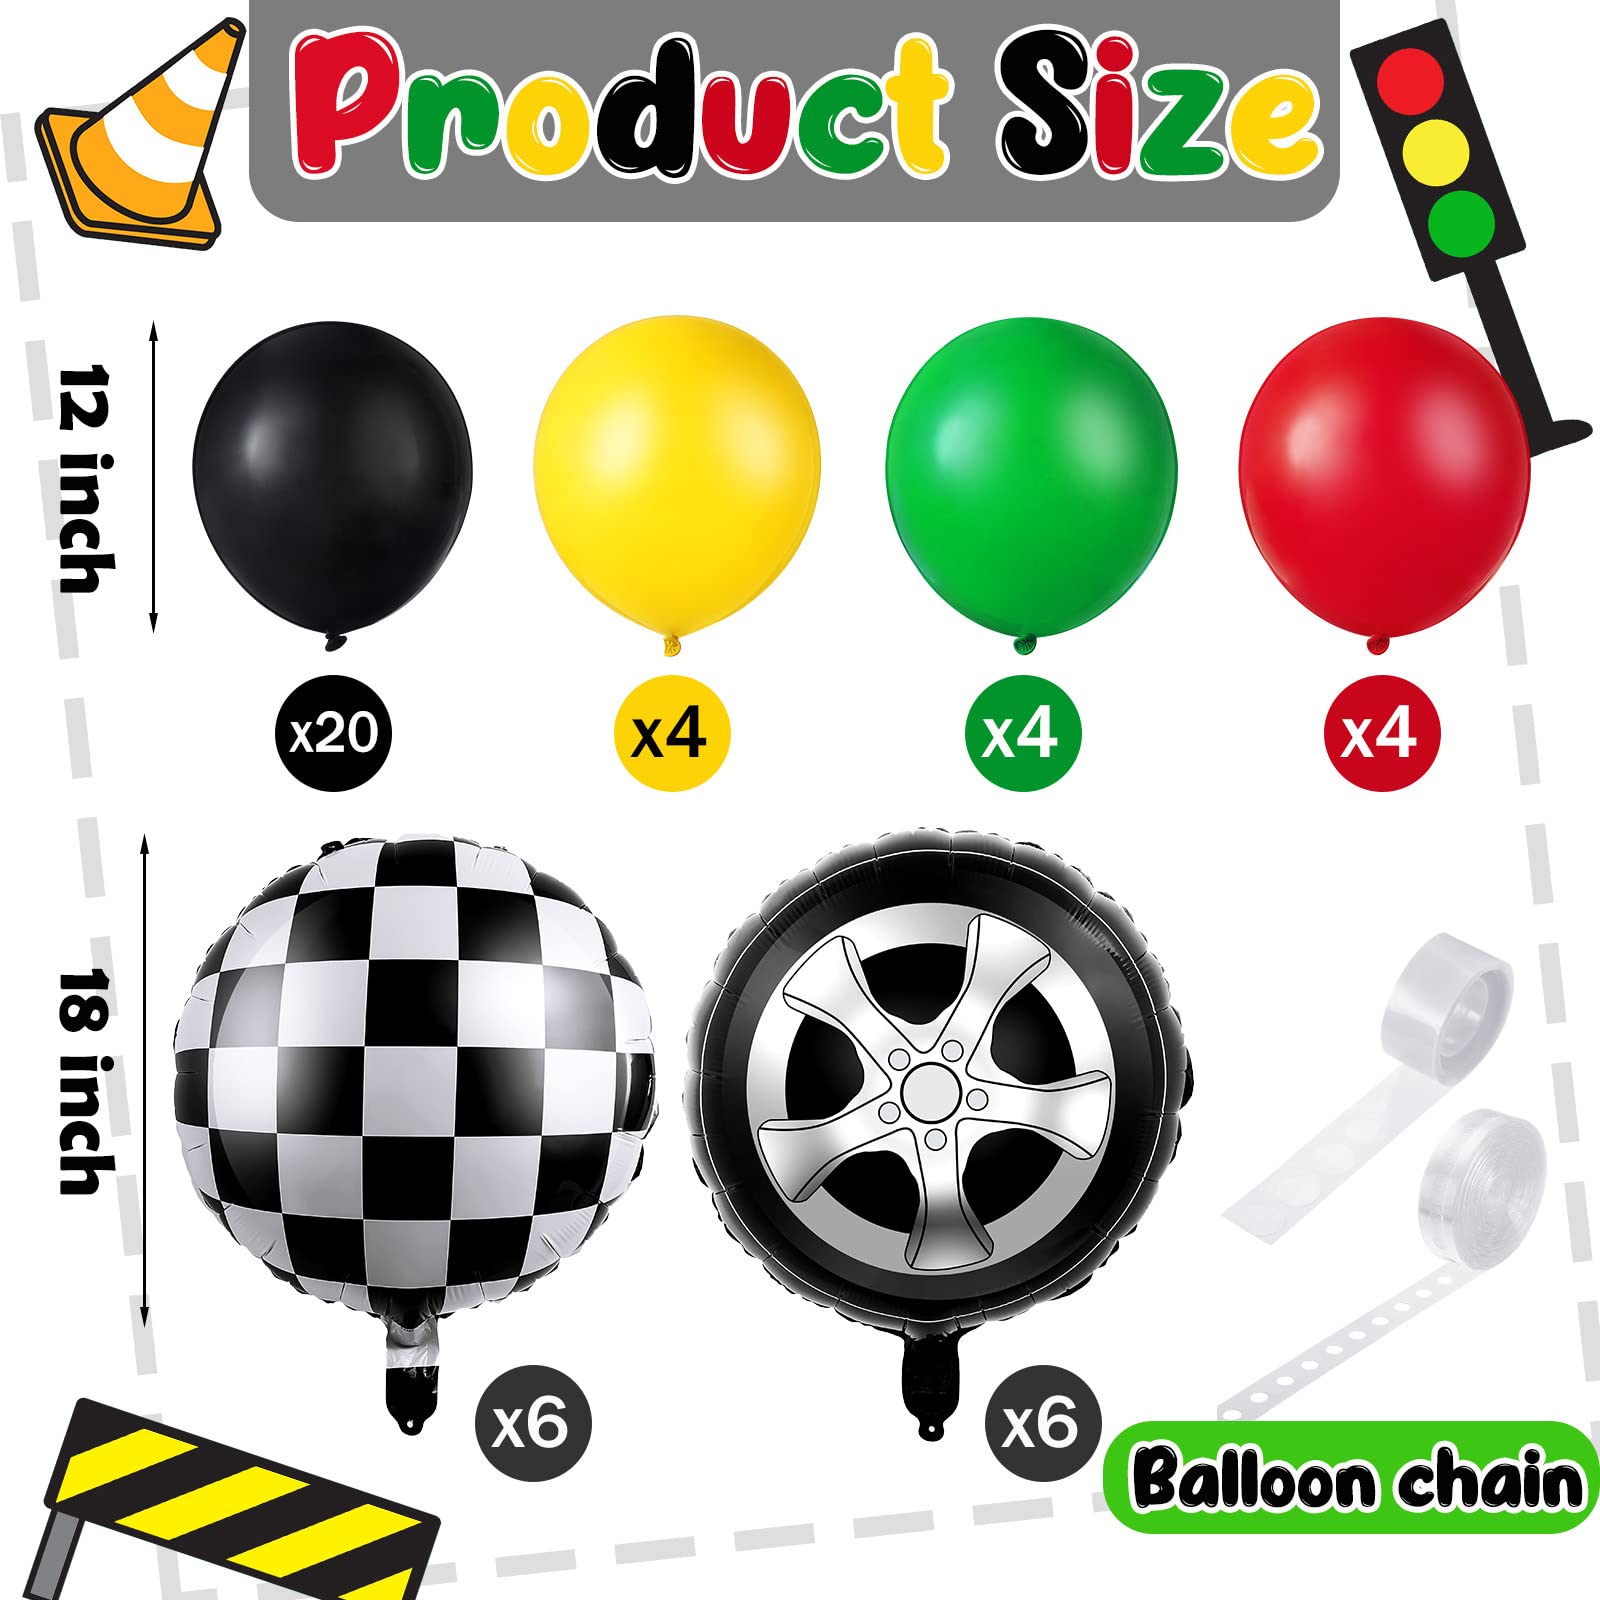 66 Pcs Car Party Decorations Inflatable Tires Traffic Light Balloons Party Supplies Include Foil Checkered Balloons, Tire Balloons, Glue, Chain, Birthday Party Decorations Fit for Boys Race Fans